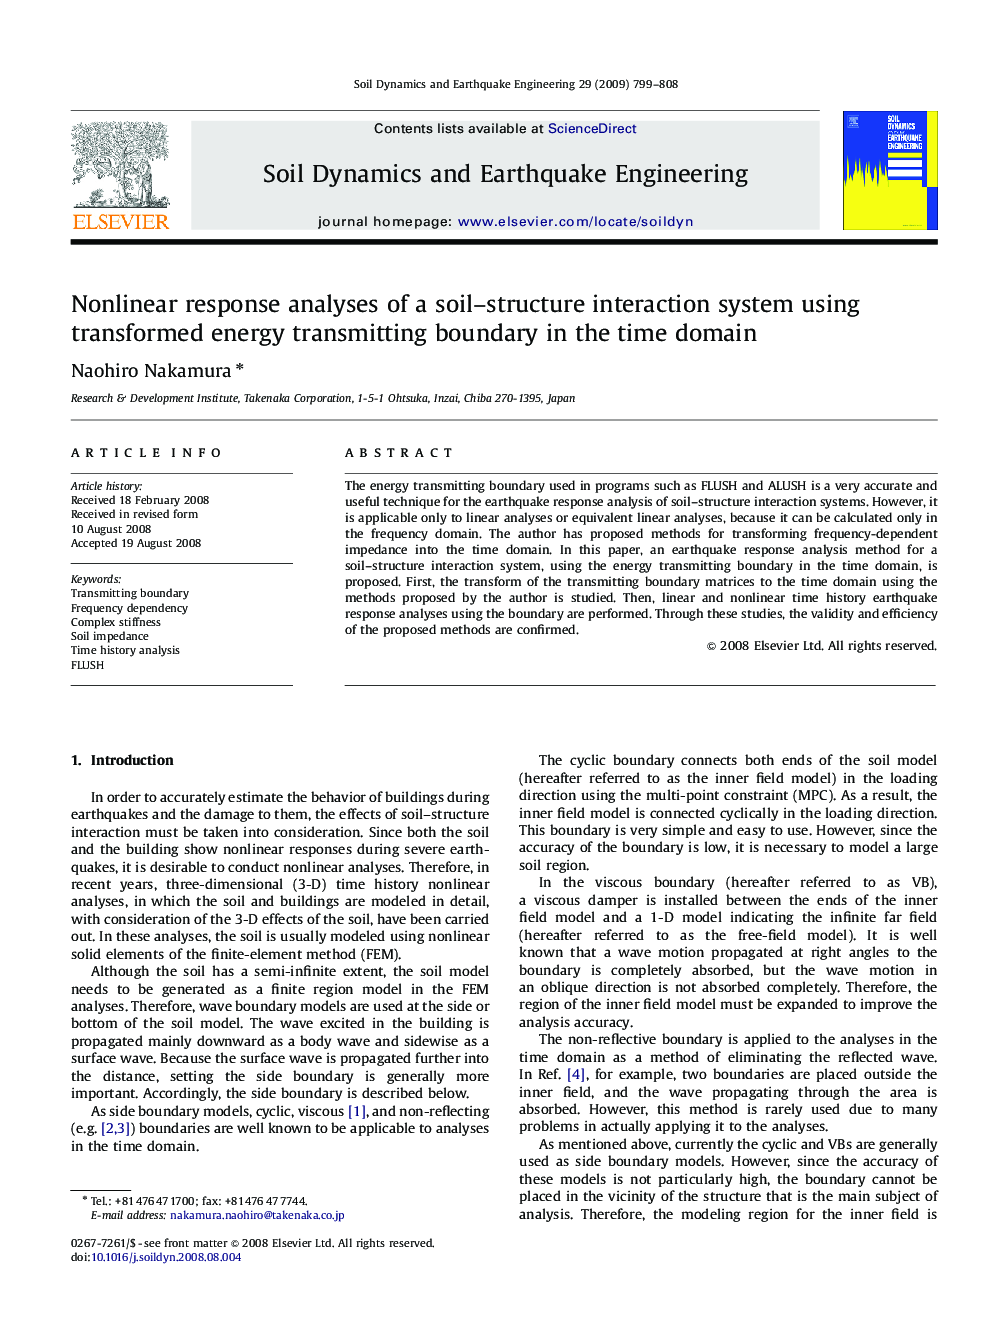 Nonlinear response analyses of a soil–structure interaction system using transformed energy transmitting boundary in the time domain